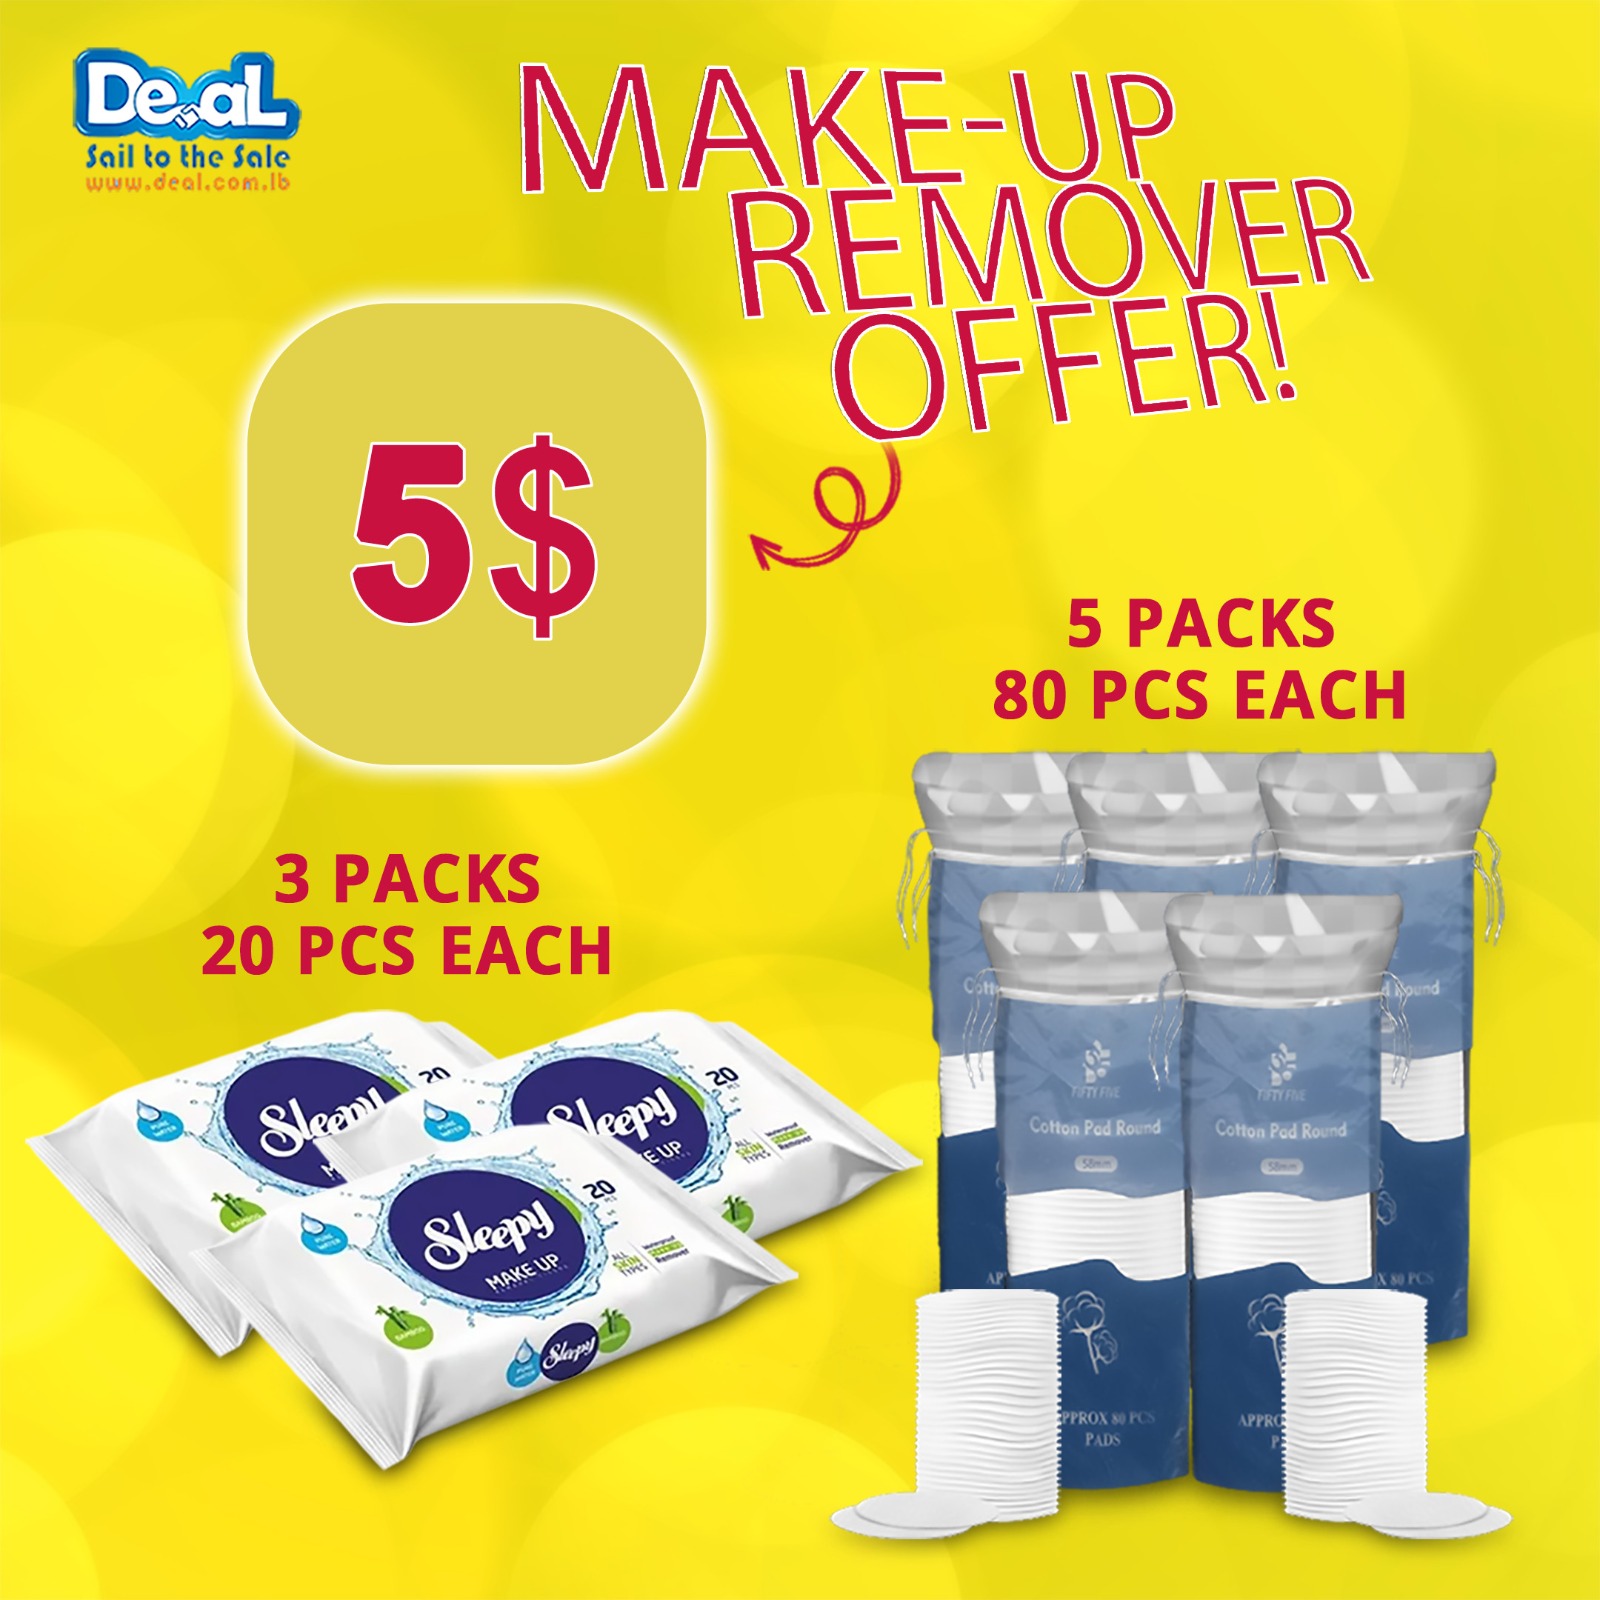 Makeup Remover Offer of 3Packs Of Wipes 20 Pcs Each and 5 Packs Of Cotton Pad 80Pcs Each